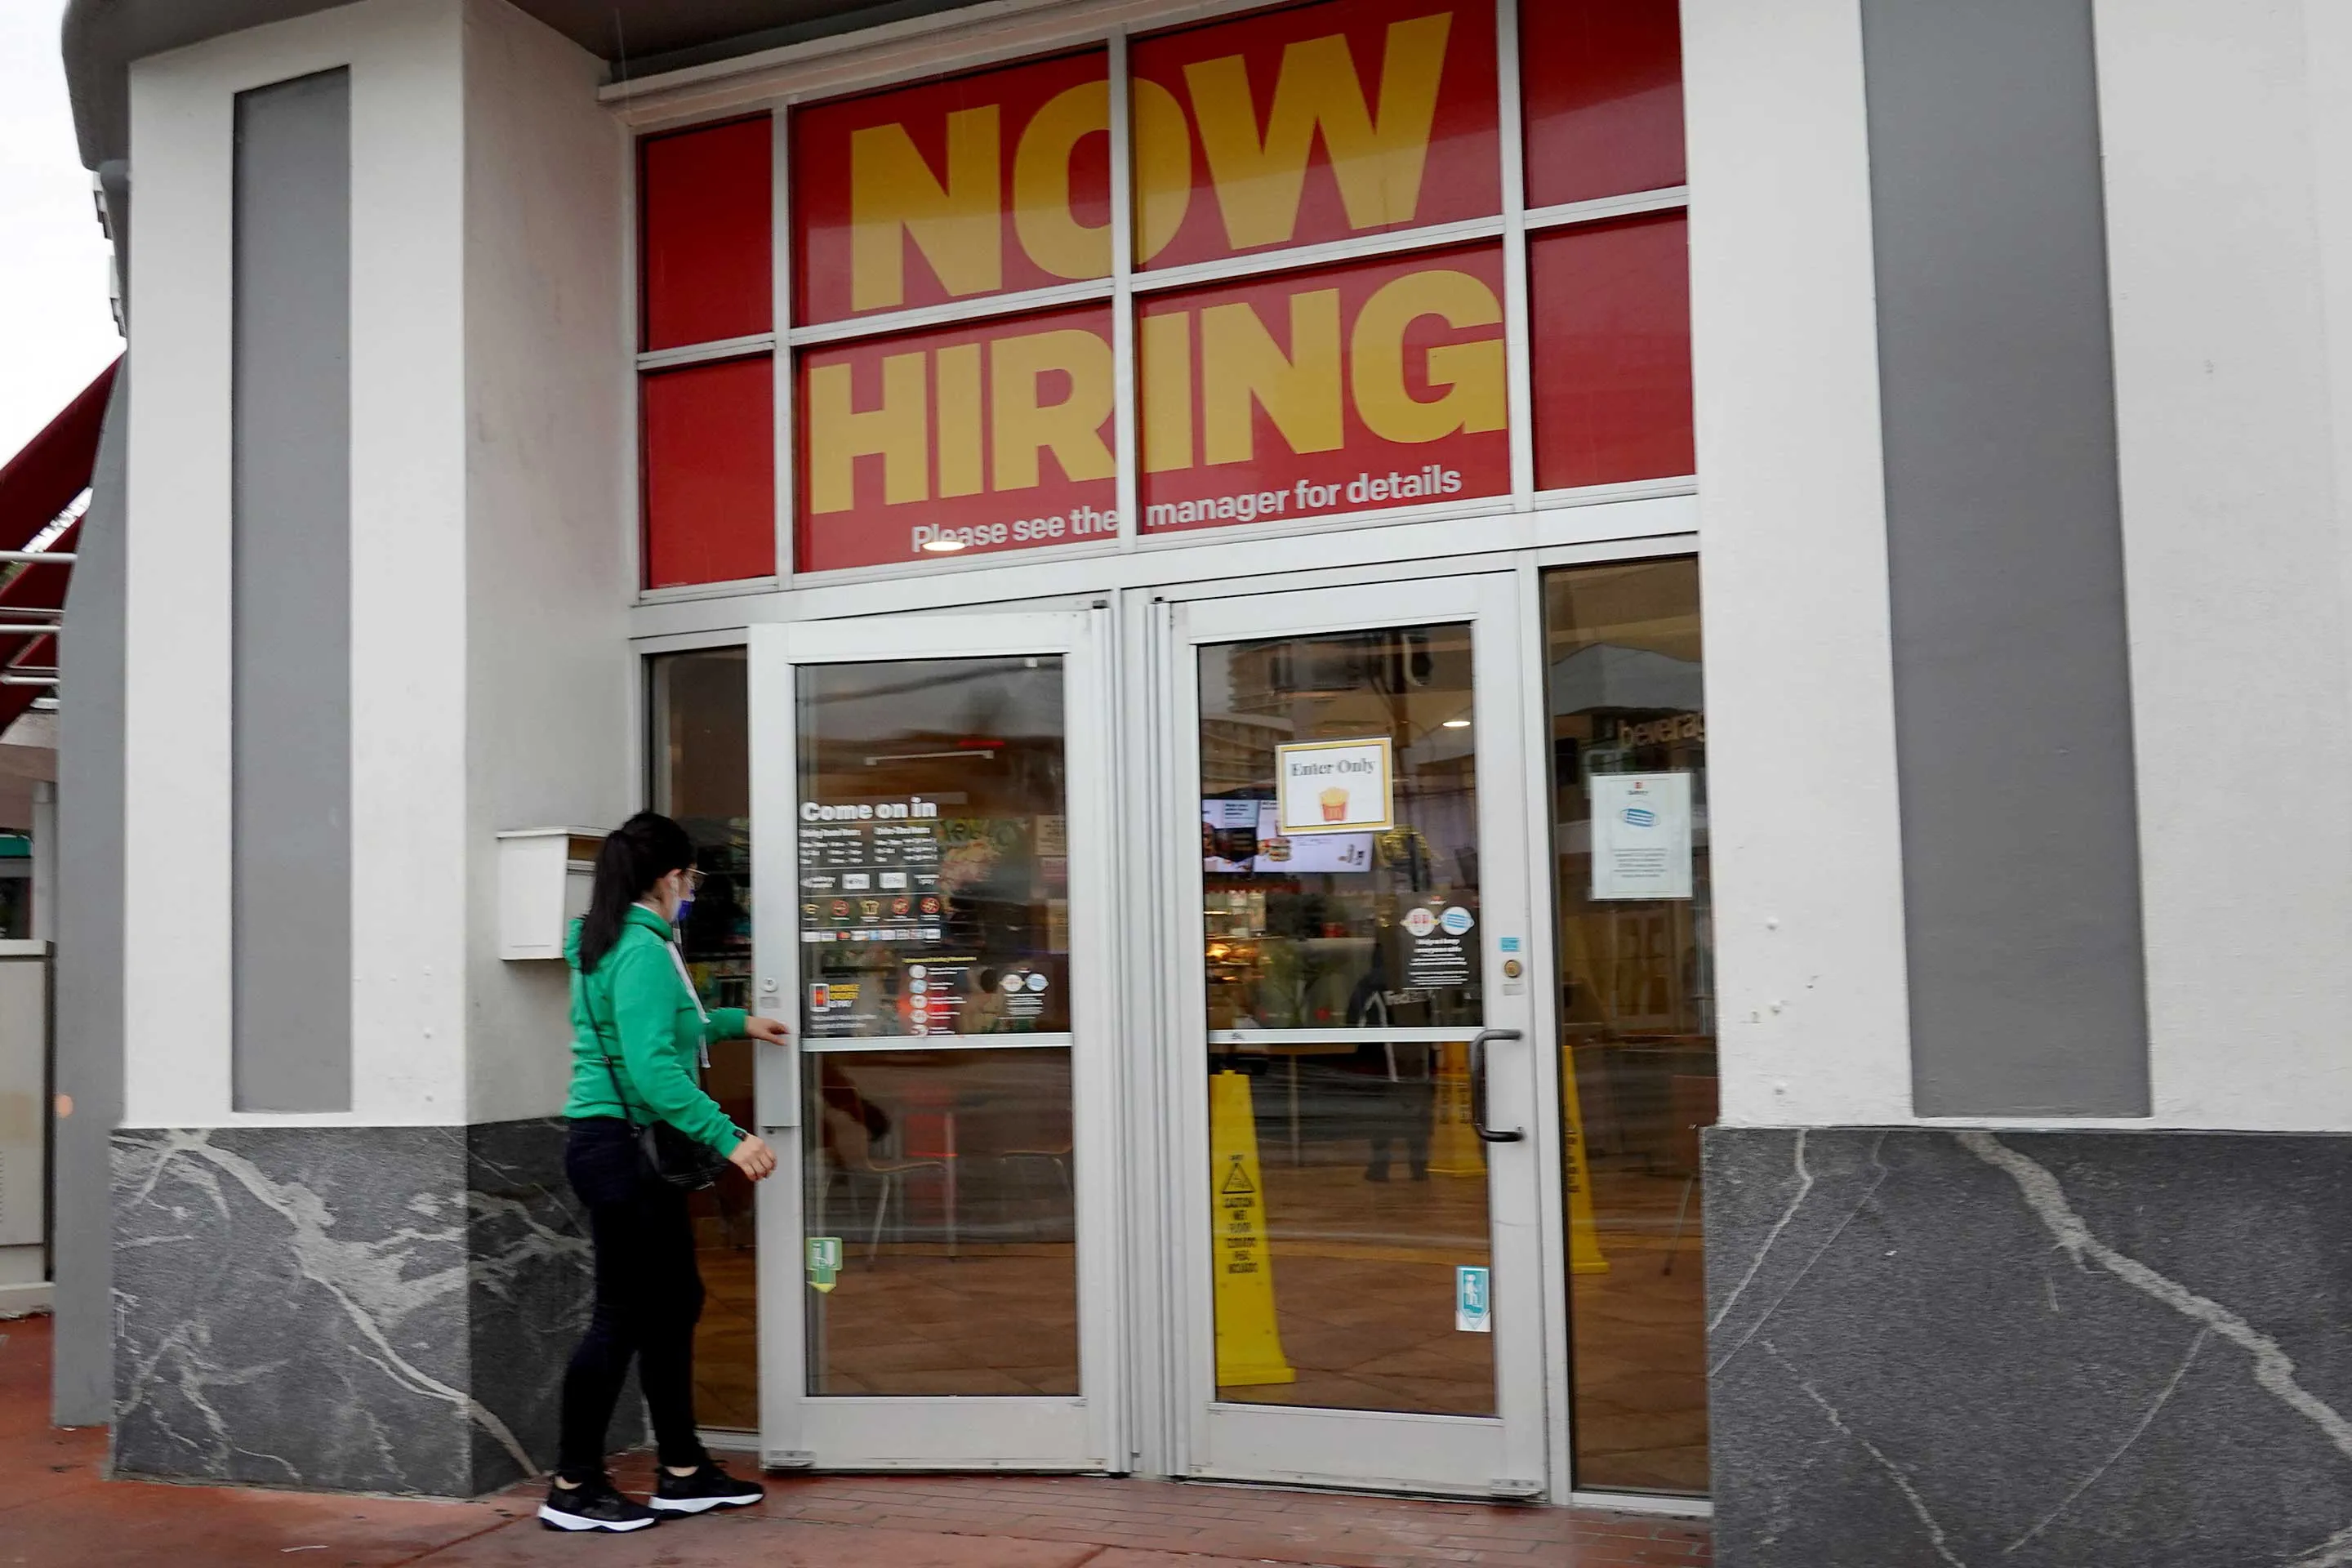 Layoffs and Unemployment Are Reaching Record Lows. But the Numbers May Be Misleading